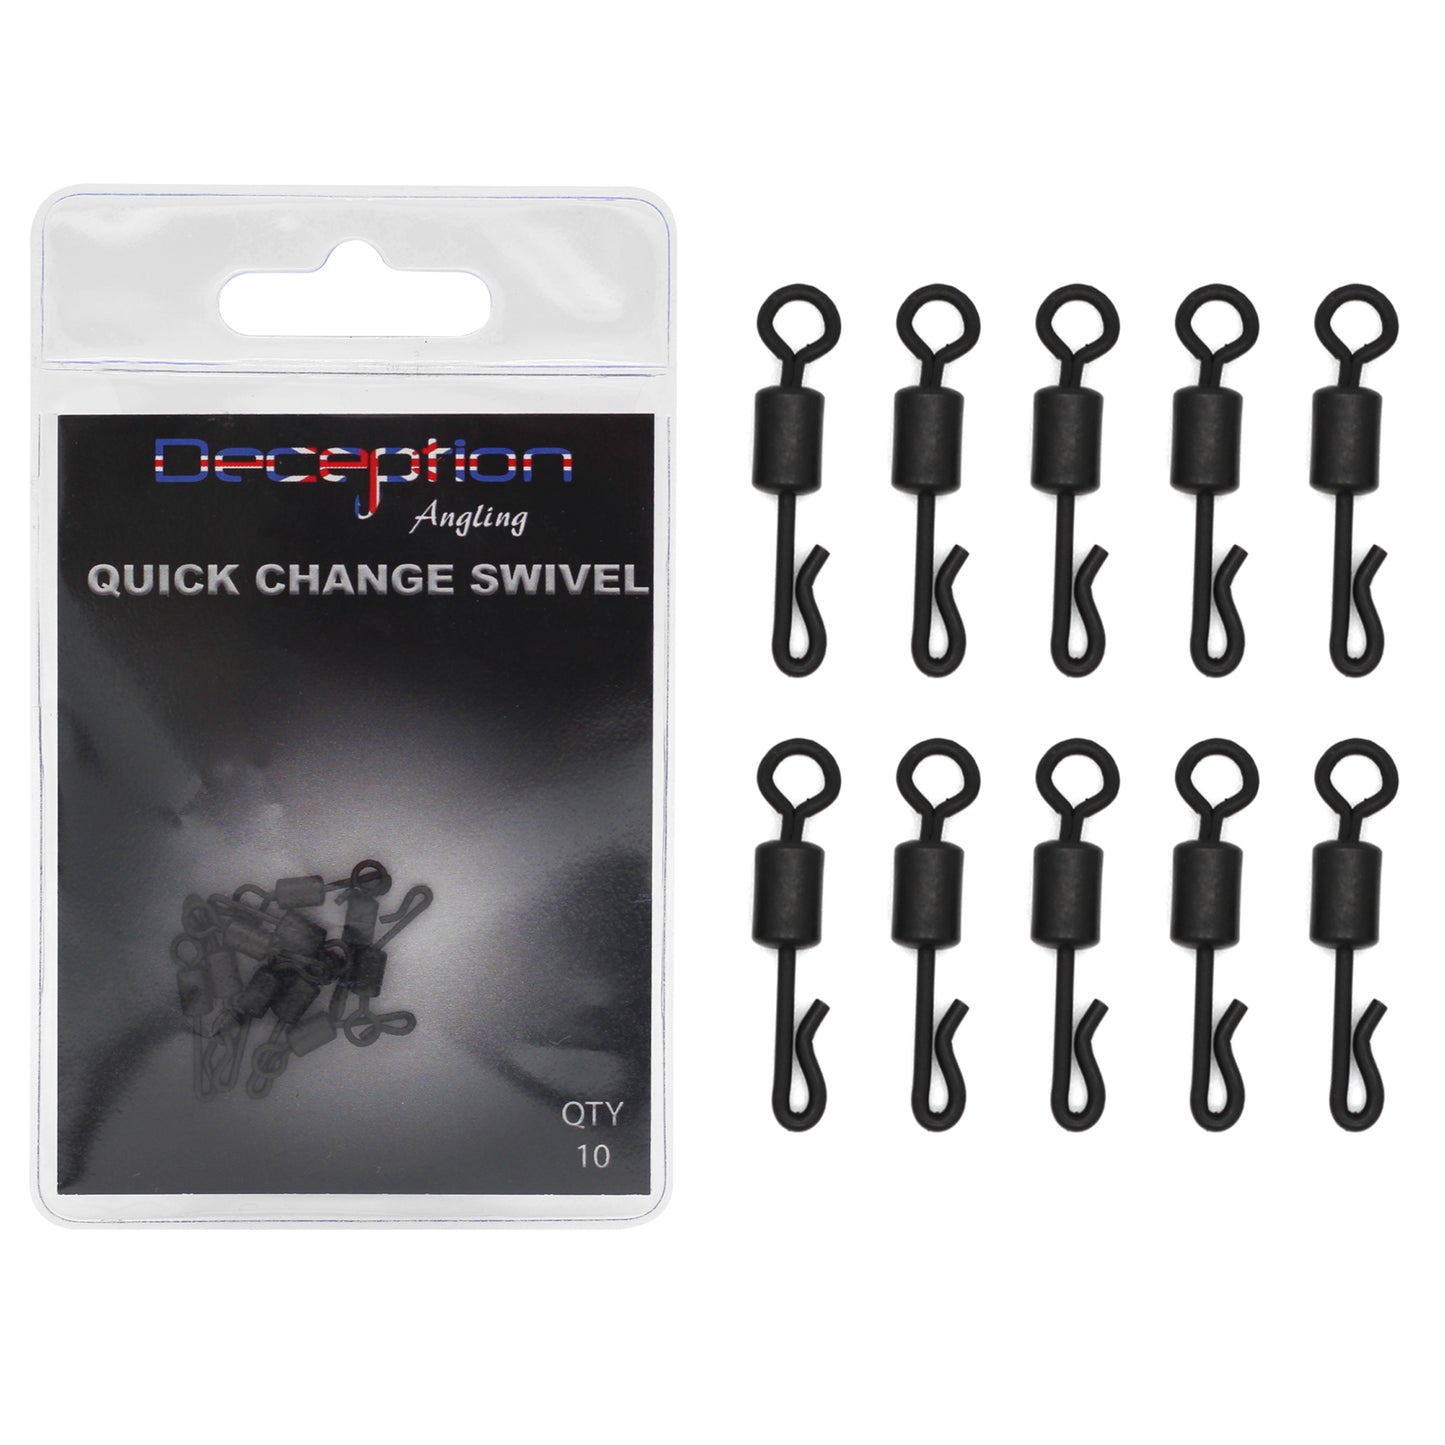 Deception Angling Quick Change Swivels for Fishing Pack of 10